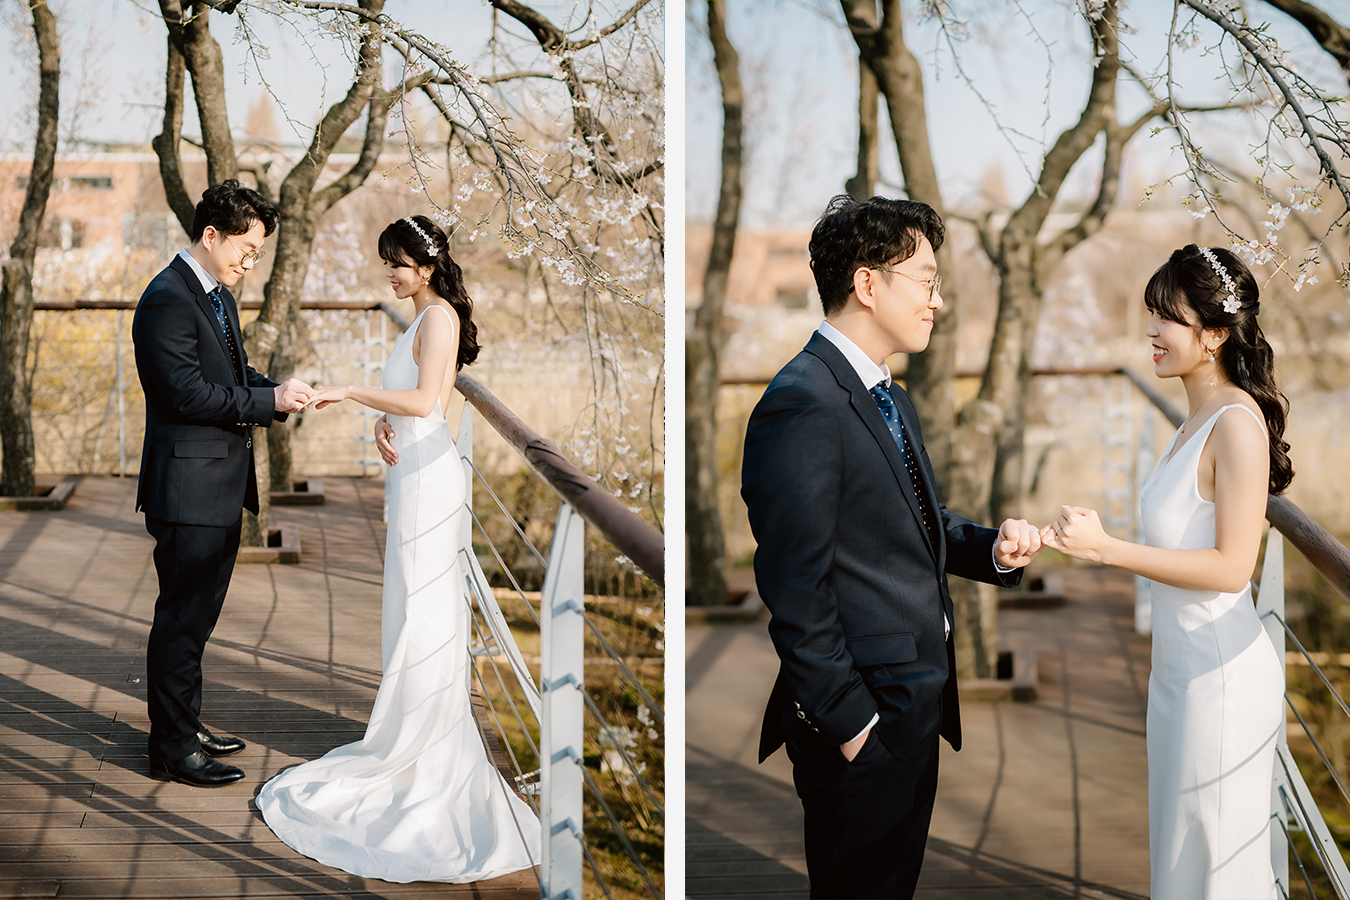 Cute Korea Pre-Wedding Photoshoot Under the Cherry Blossoms Trees by Jungyeol on OneThreeOneFour 9